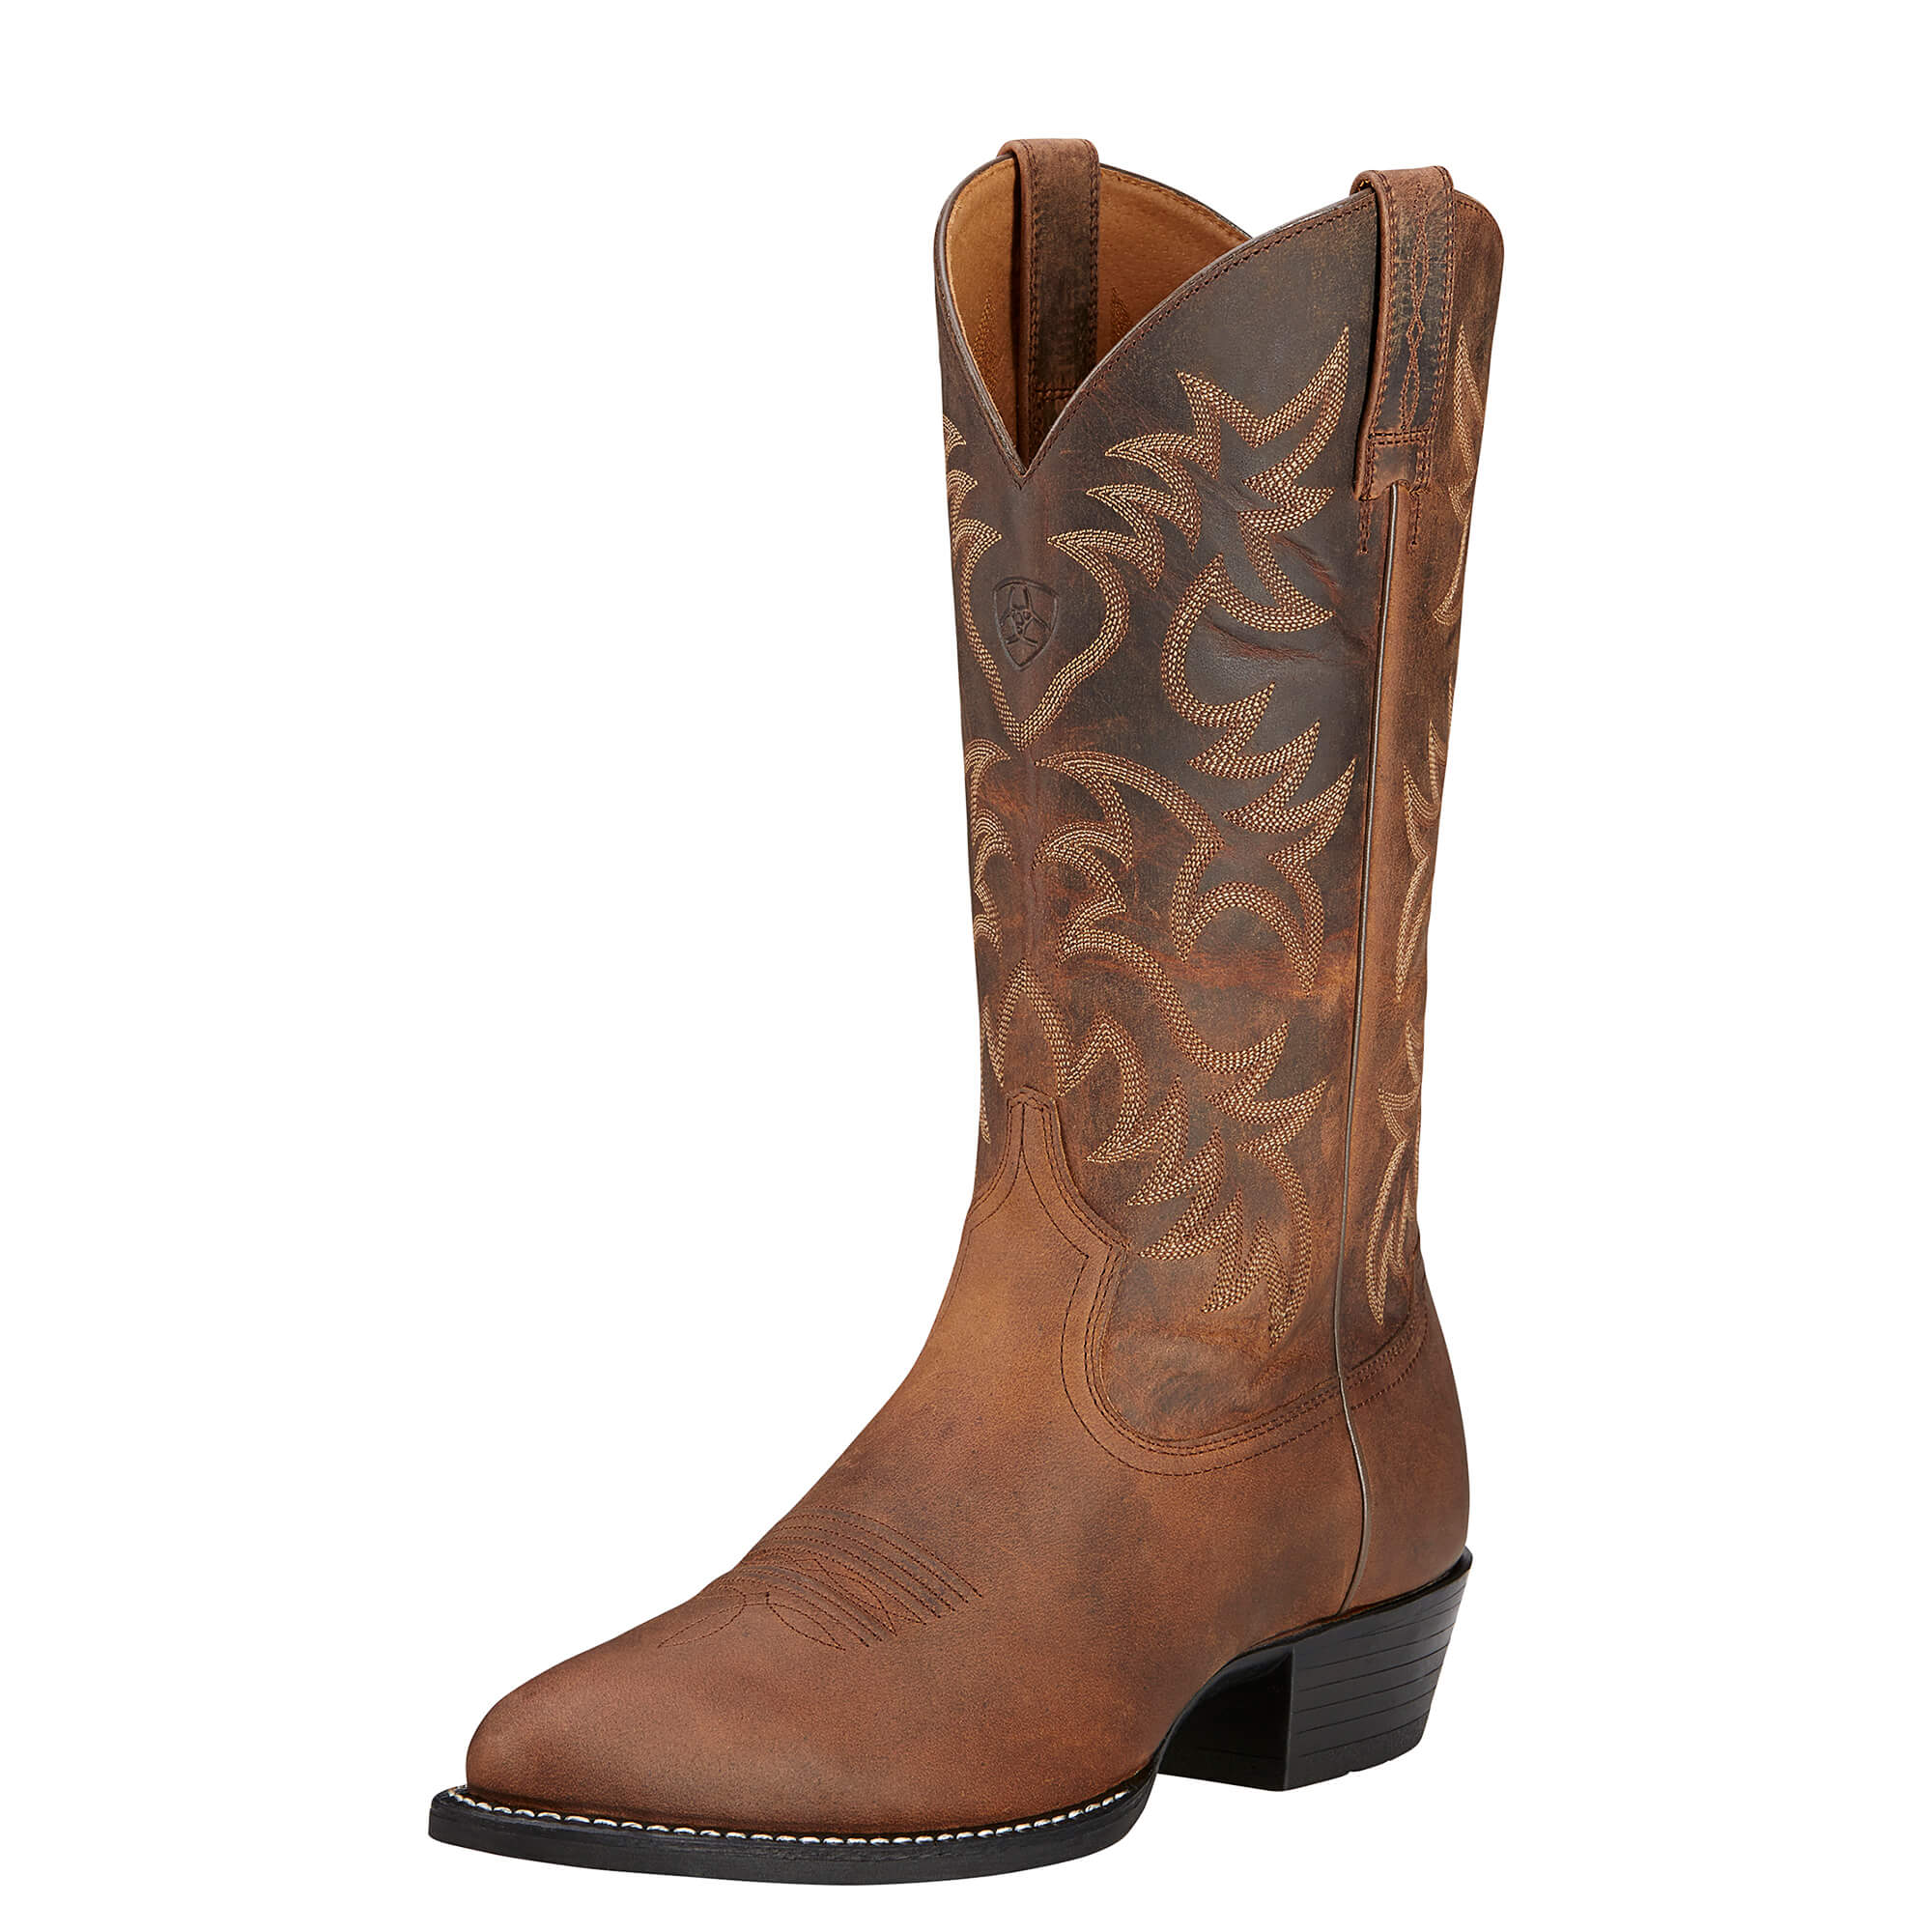 Ariat_Mens_Heritage_R_Toe_Western_Boot_10002204_3-4_front